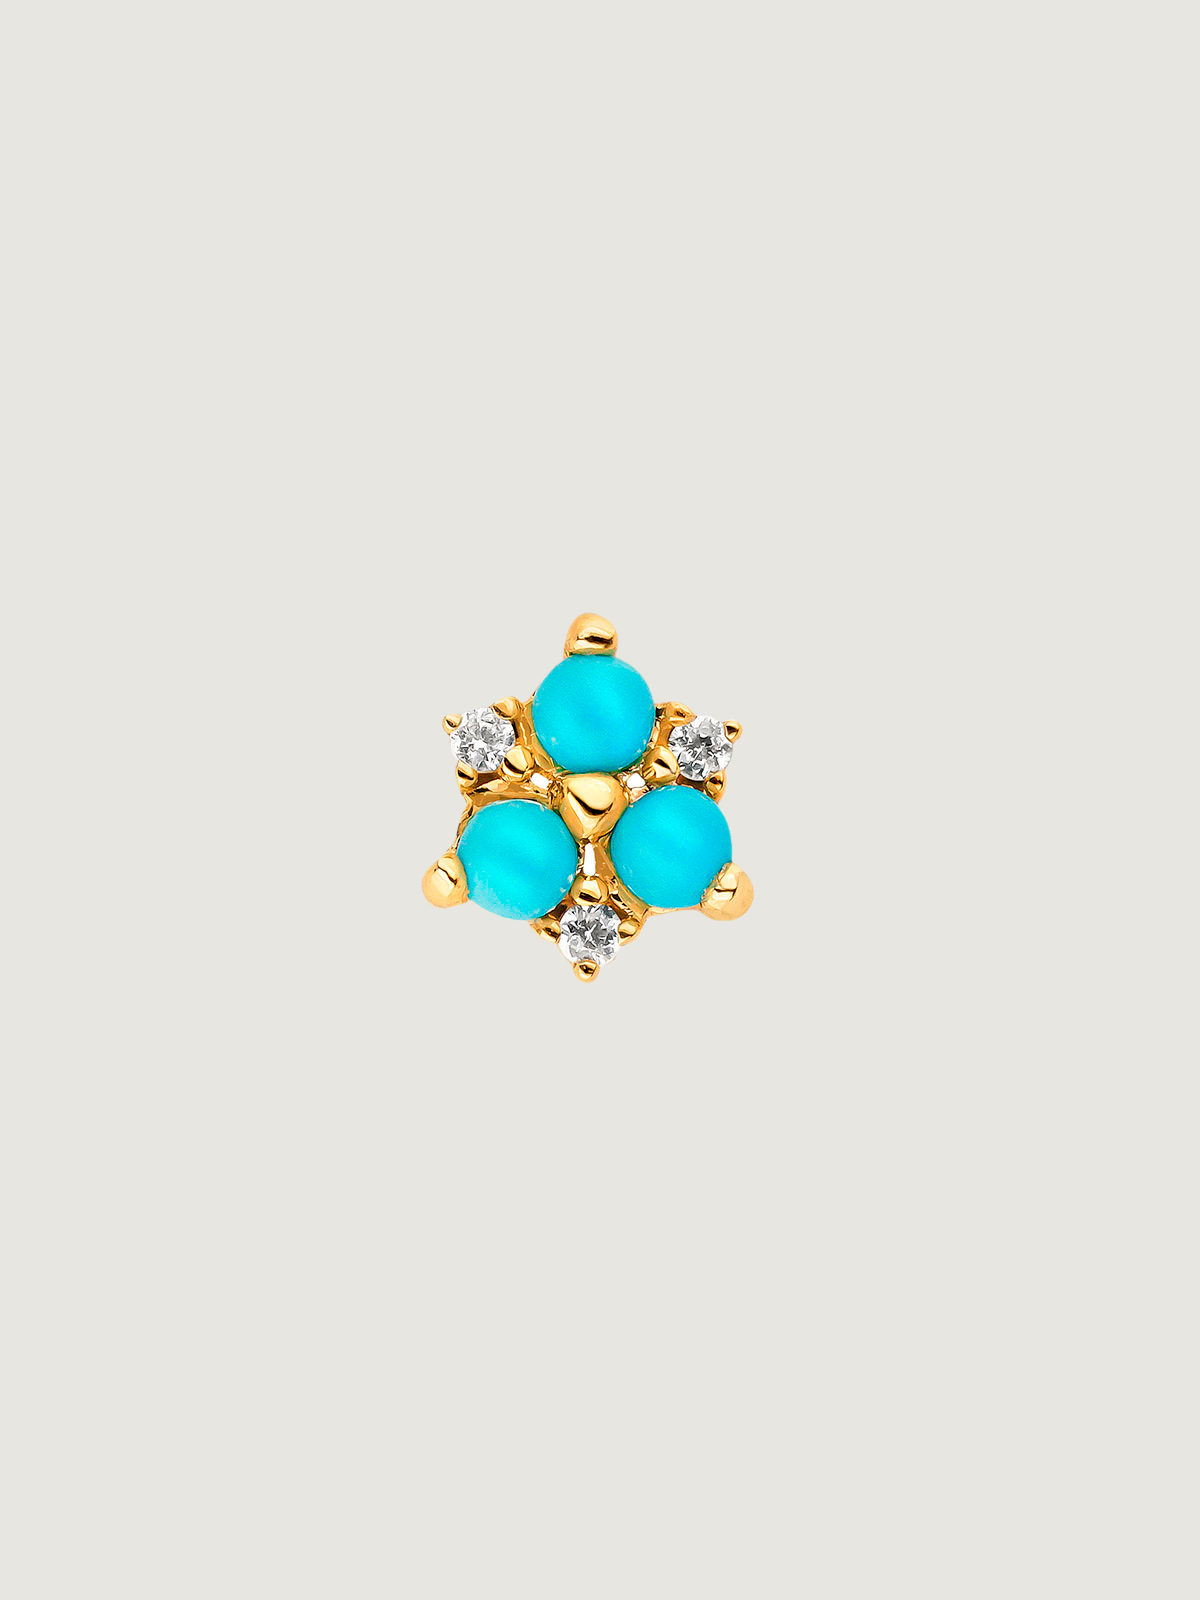 Individual 9K yellow gold earring with turquoise and white sapphires.